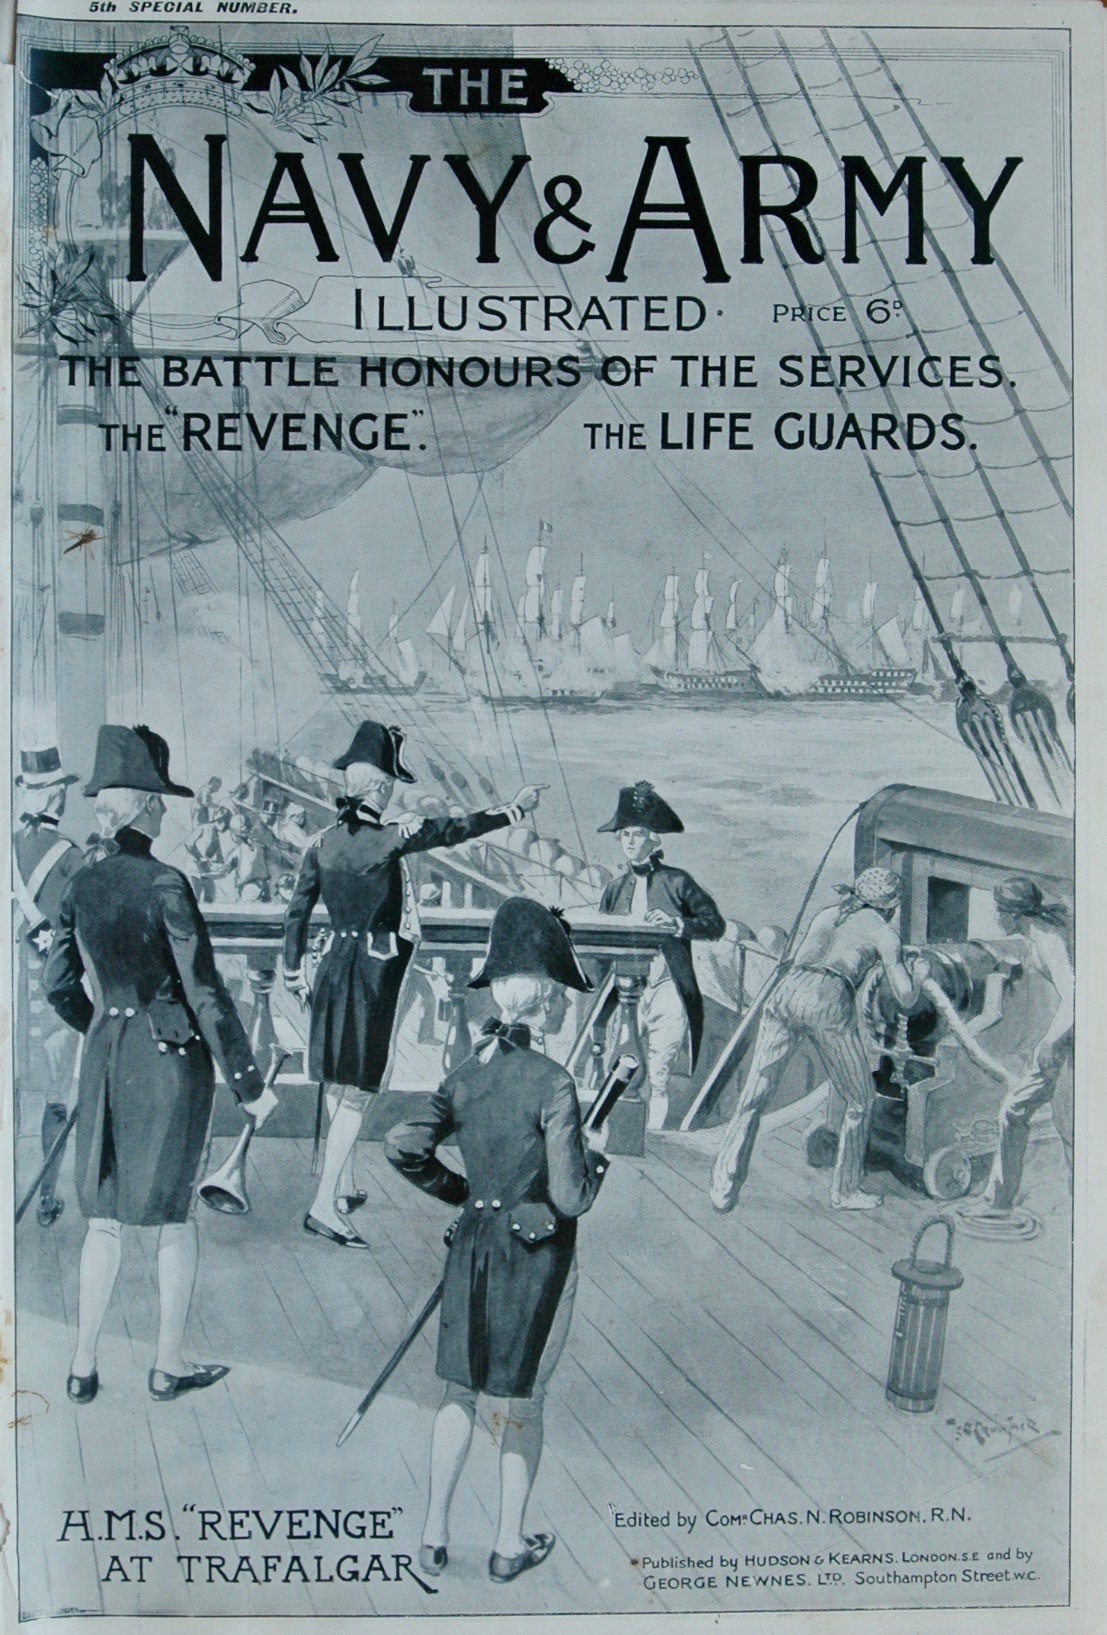 Original Full copy of Navy & Army Illustrated, 1896